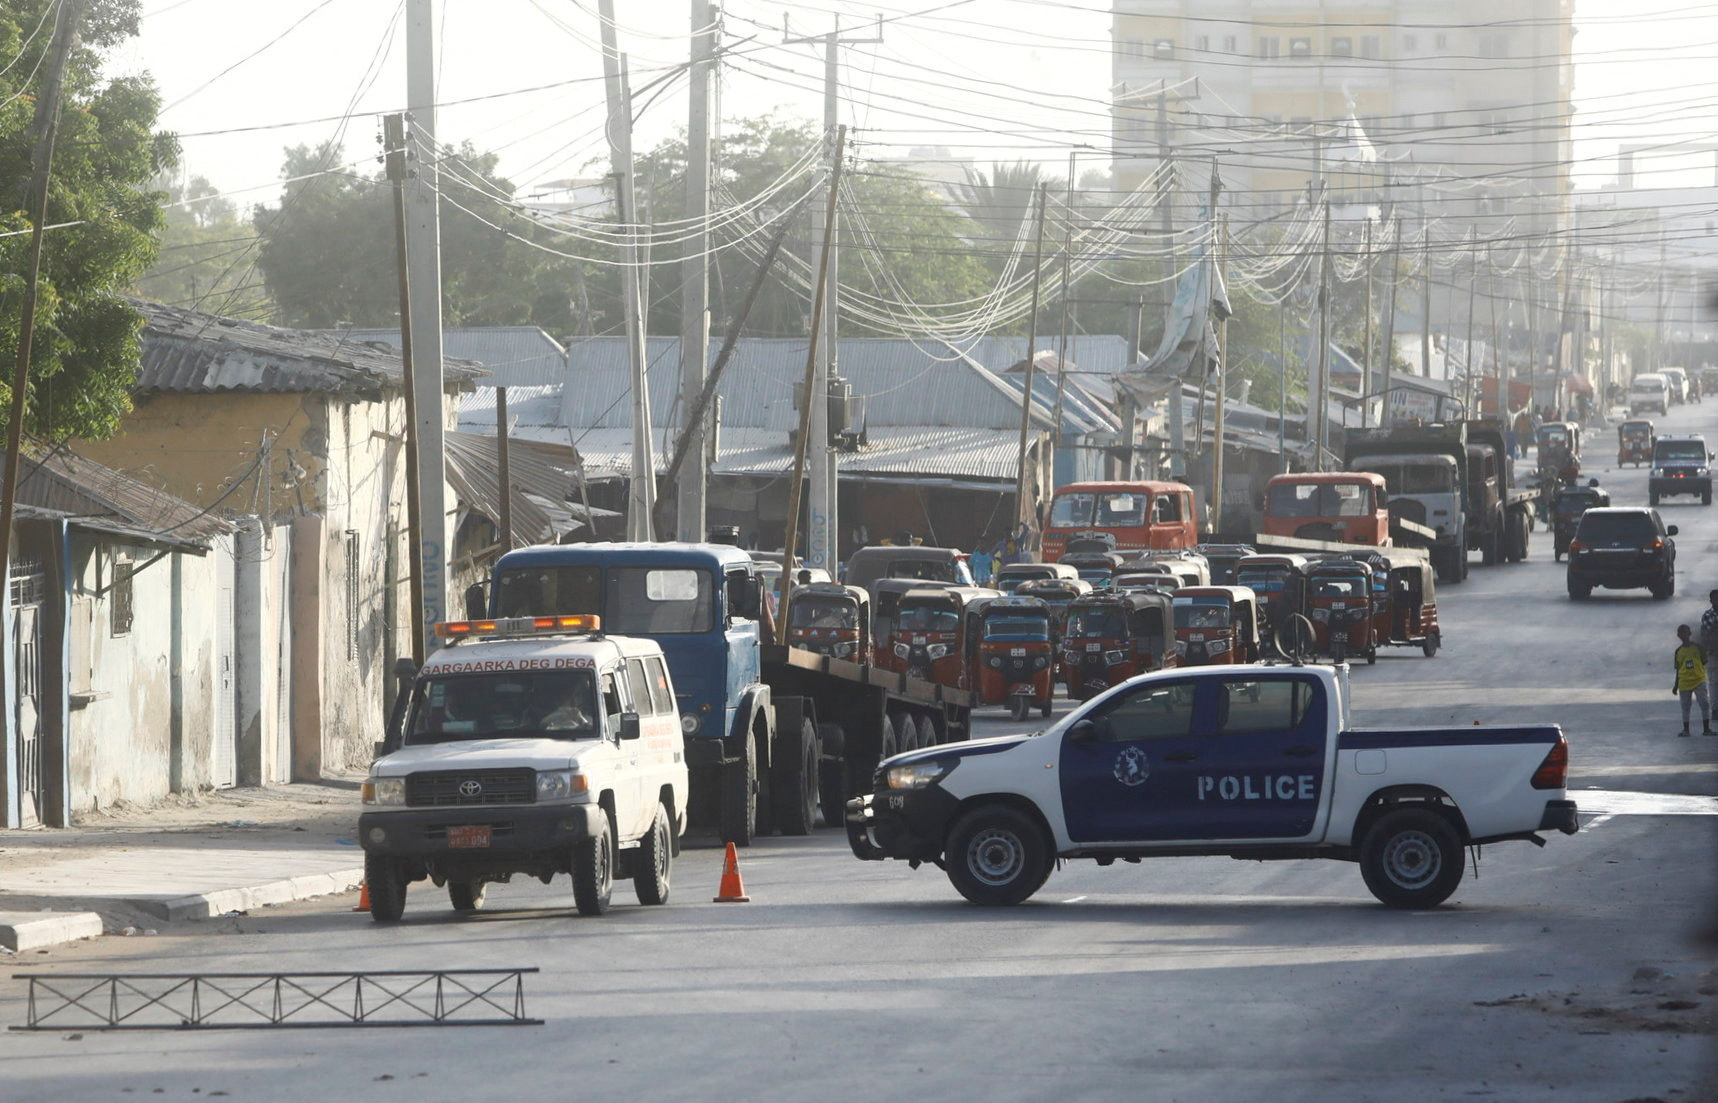 Somali security forces secure the street near the scene of a militant attack at a building in Abdias district of Mogadishu